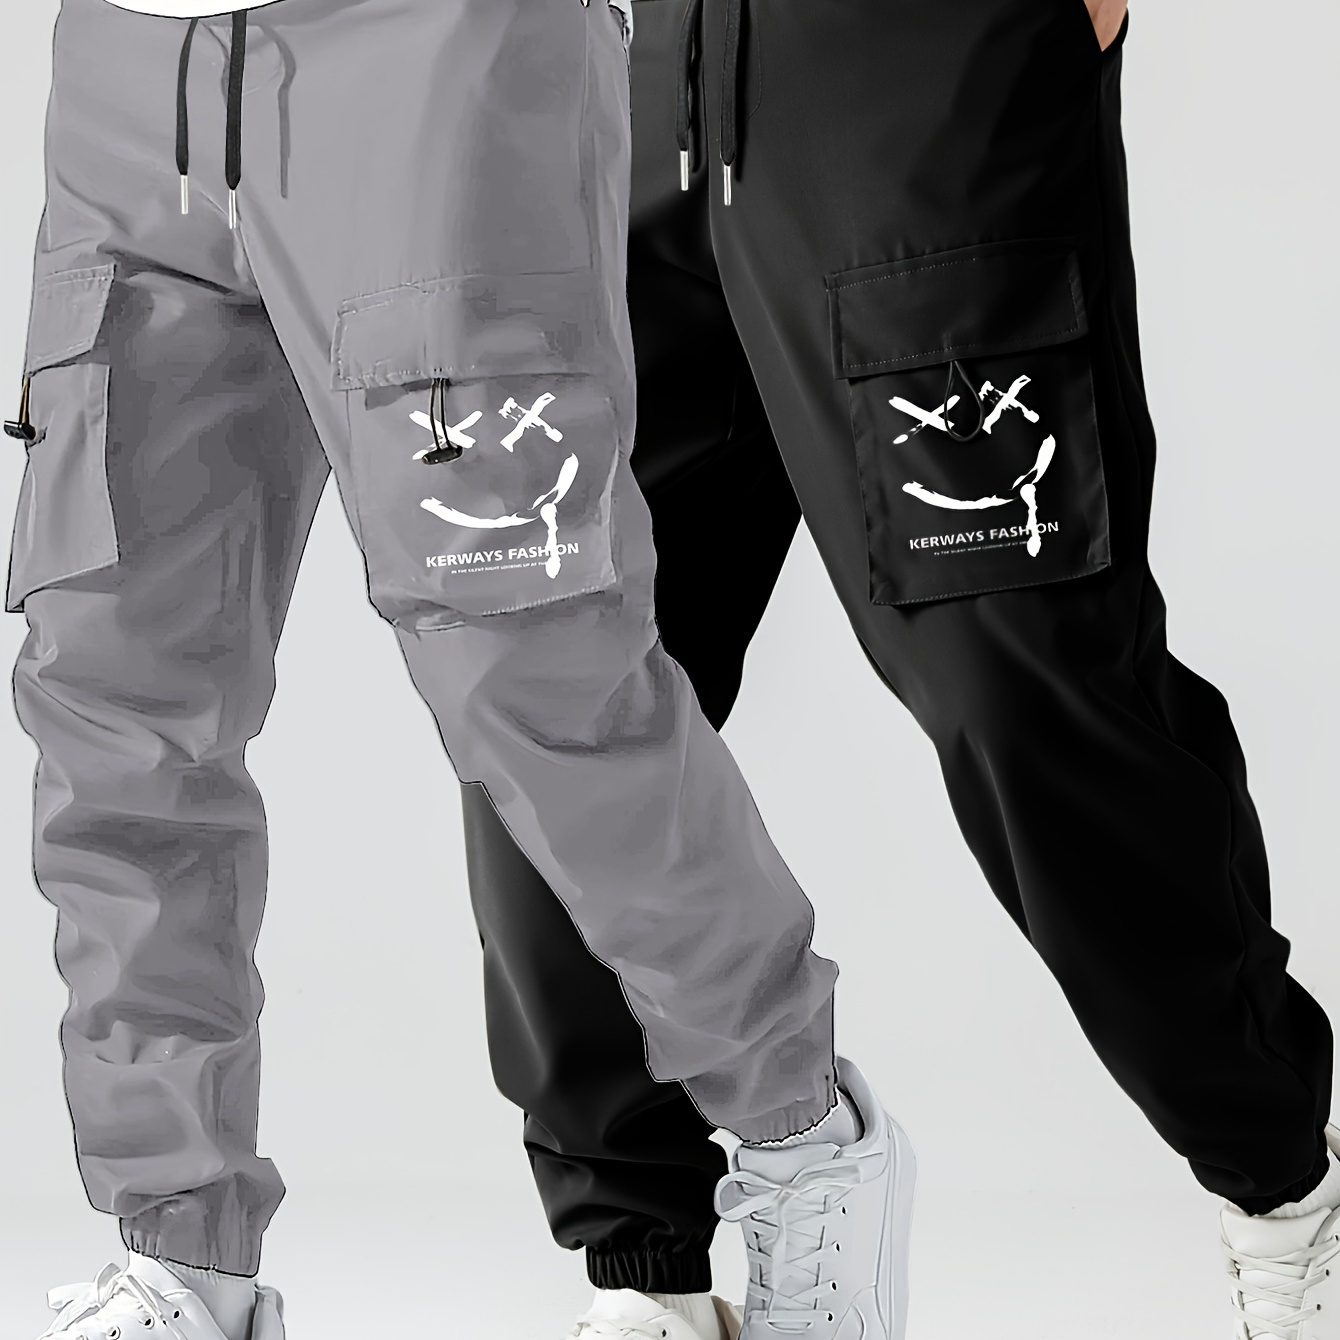 

2 Pcs Men's Stylish Smiling Face Pattern Cargo Jogger With Pockets, Causal Breathable Drawstring Men's Bottom Clothing For City Walk Street Hanging Outdoor Activities